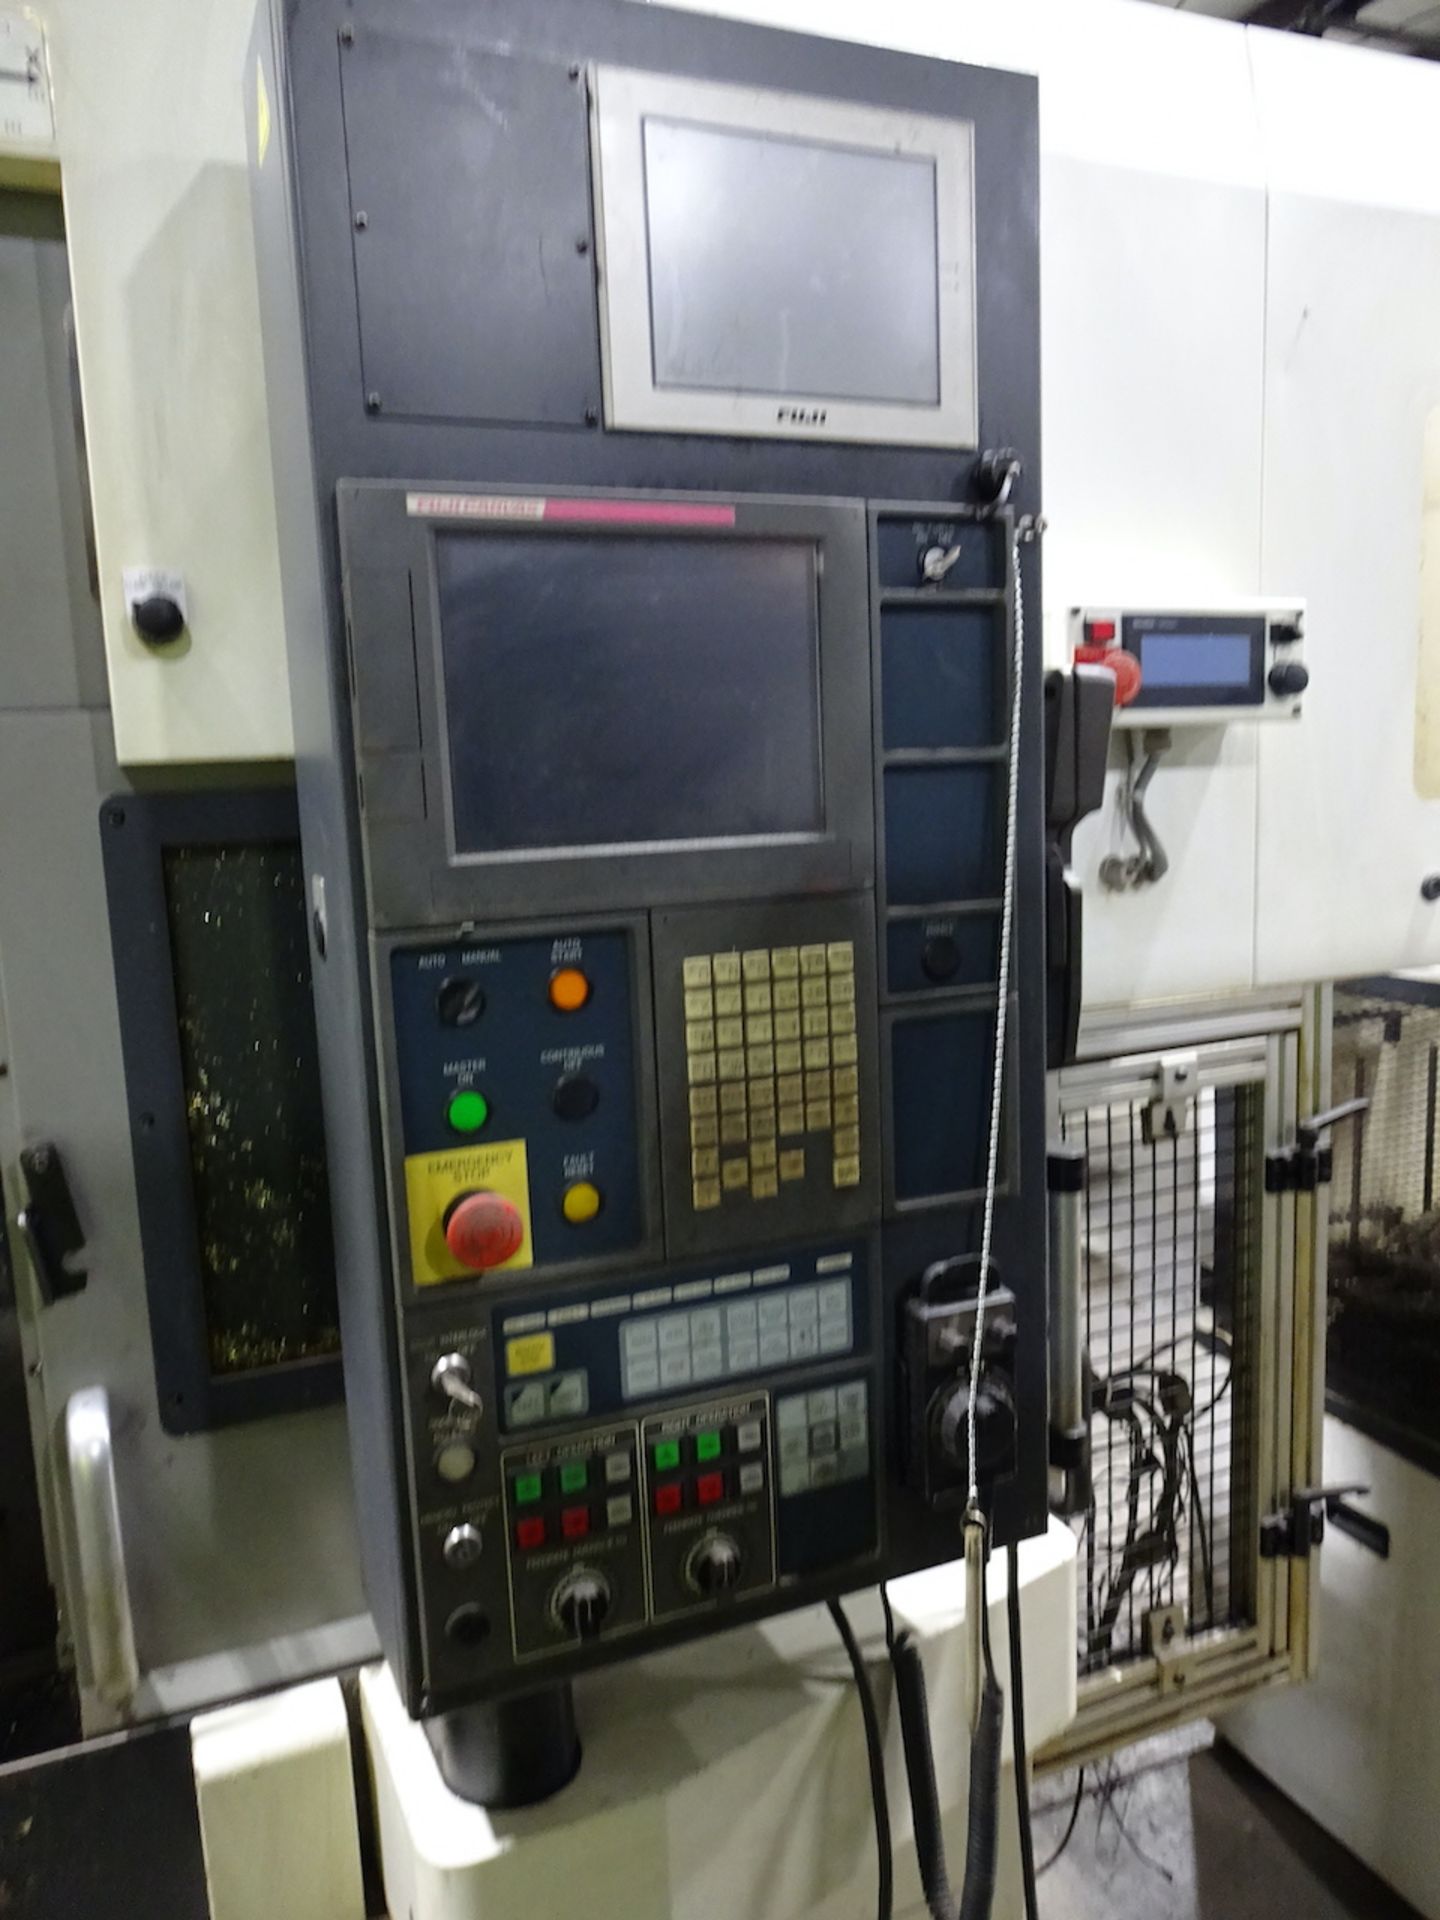 FUJI CSD-300 TWIN SPINDLE CNC LATHE (2014) S/N SE0102377, GANTRY LOAD AND STOCKER TABLE, RECOMMENDED - Image 4 of 25